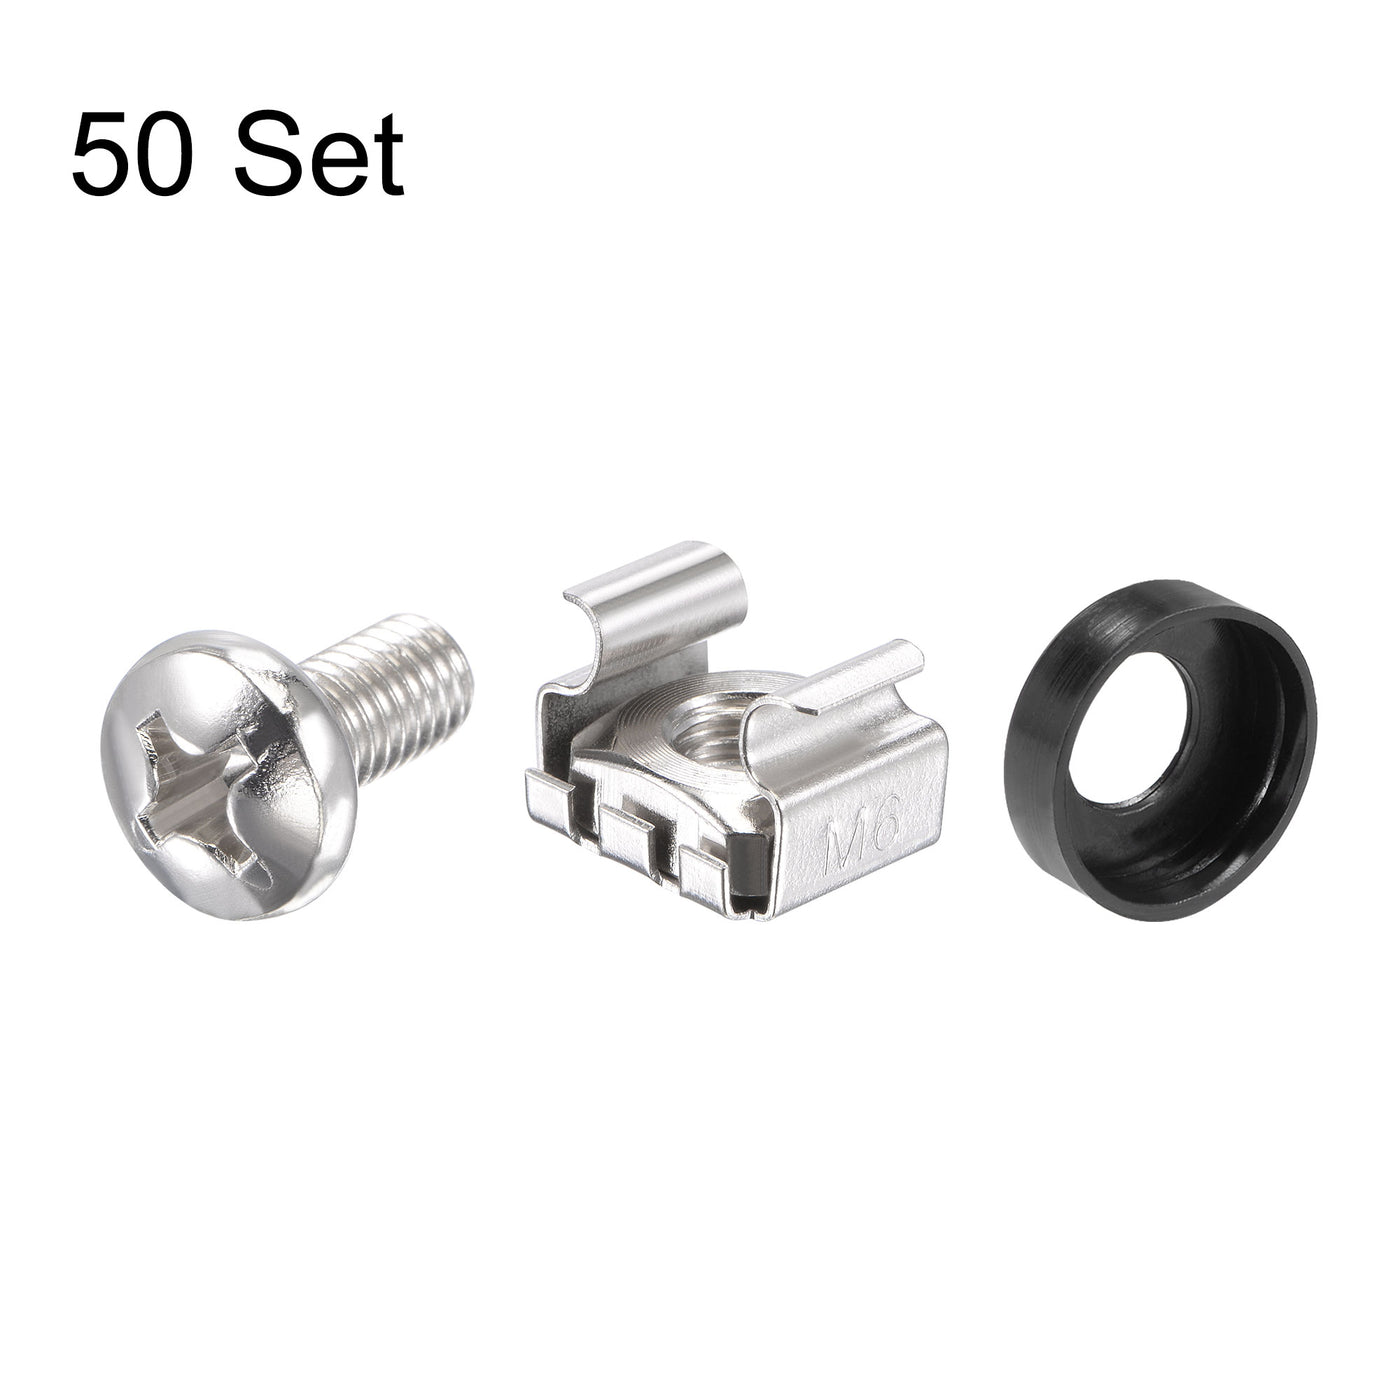 uxcell Uxcell M6x12mm Server Rack Cage Nuts Silver Tone 50Set, Mounting Screws for Server Shelves